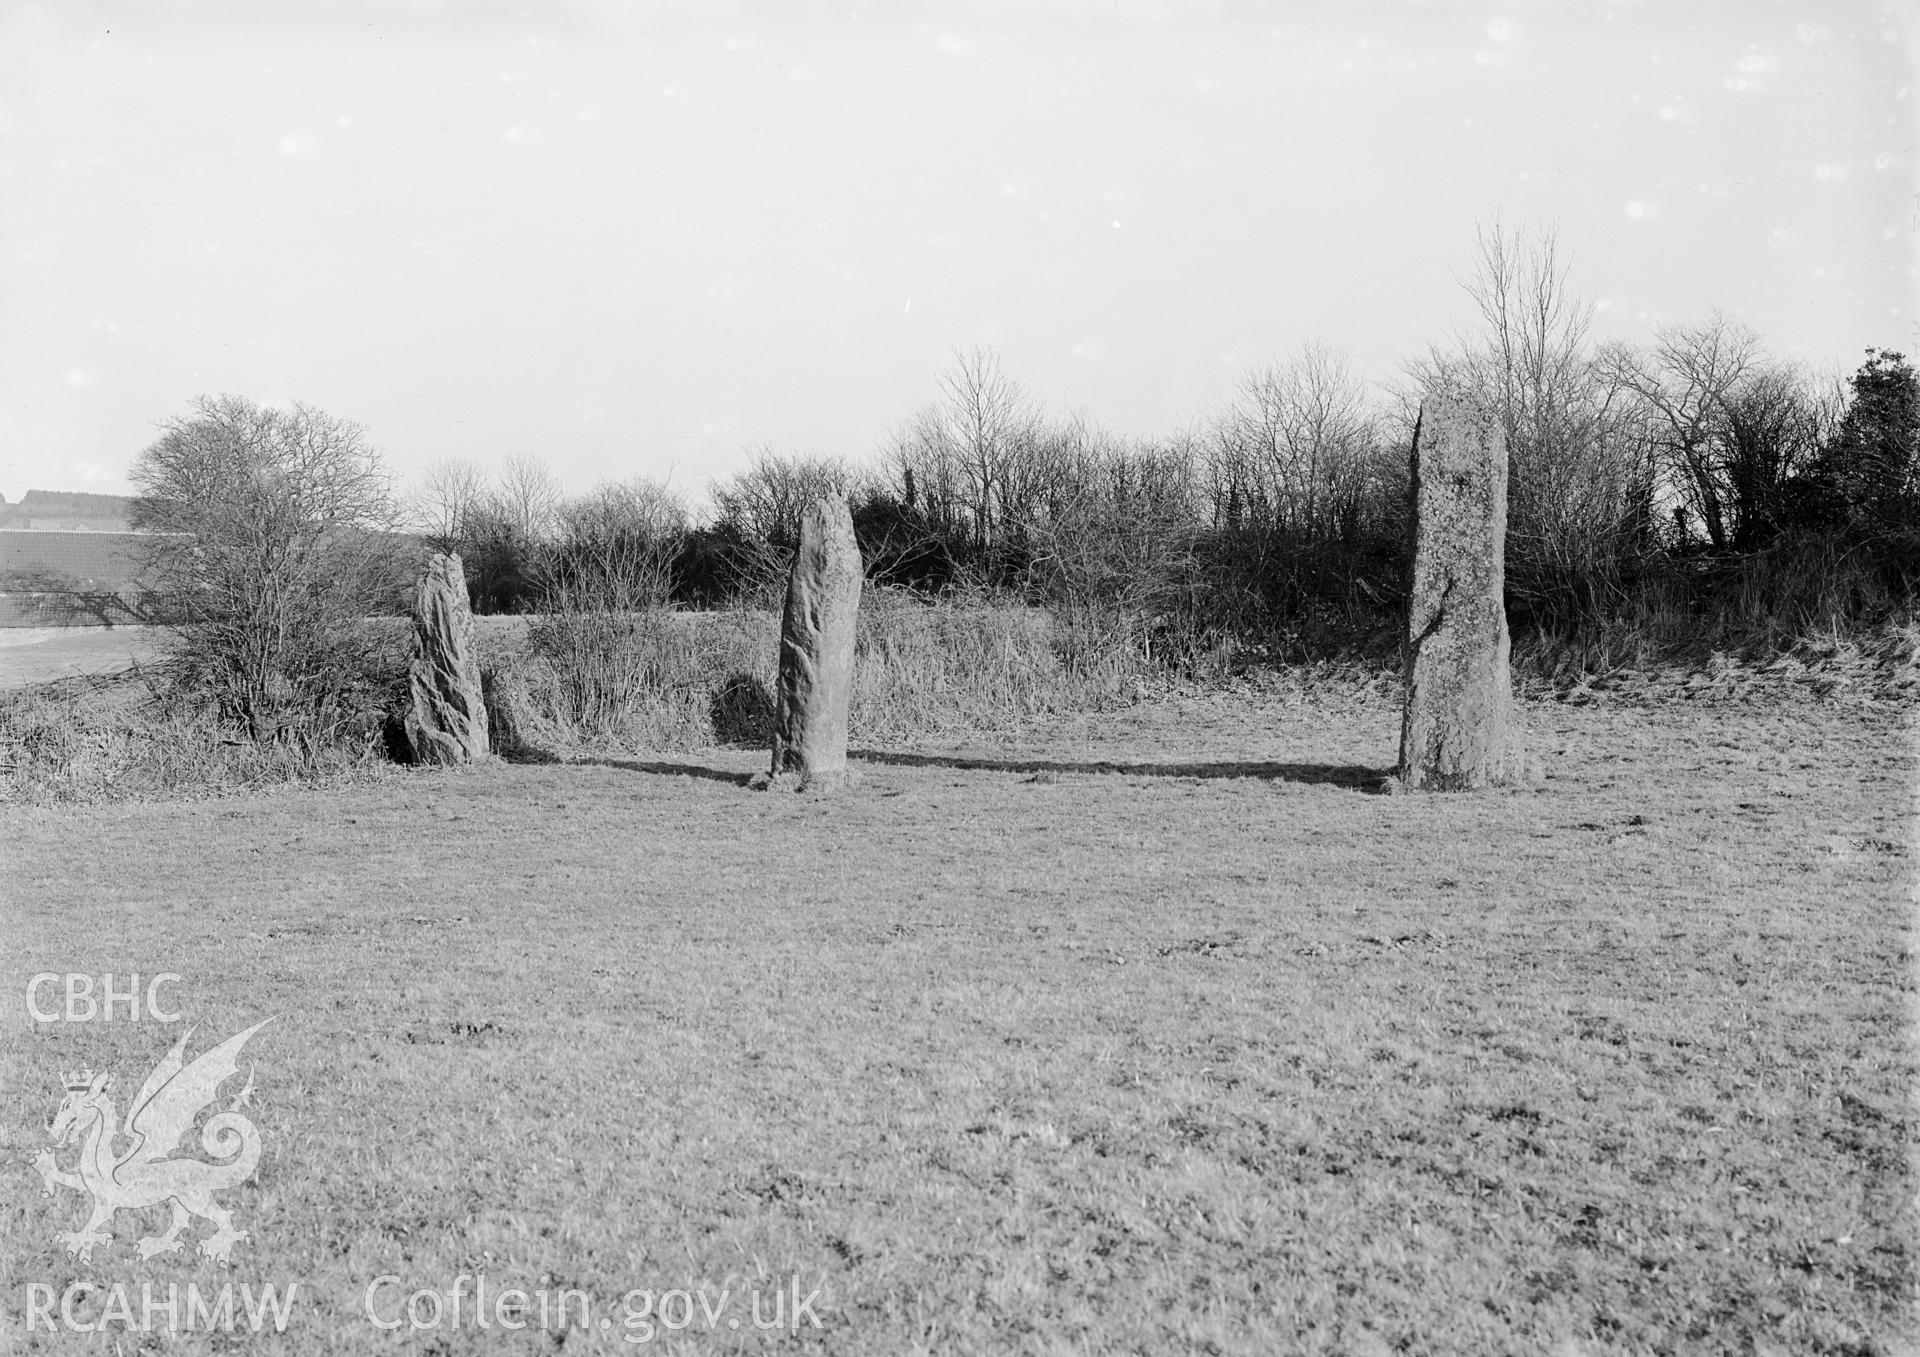 View of Harold's Stone in Trellech.